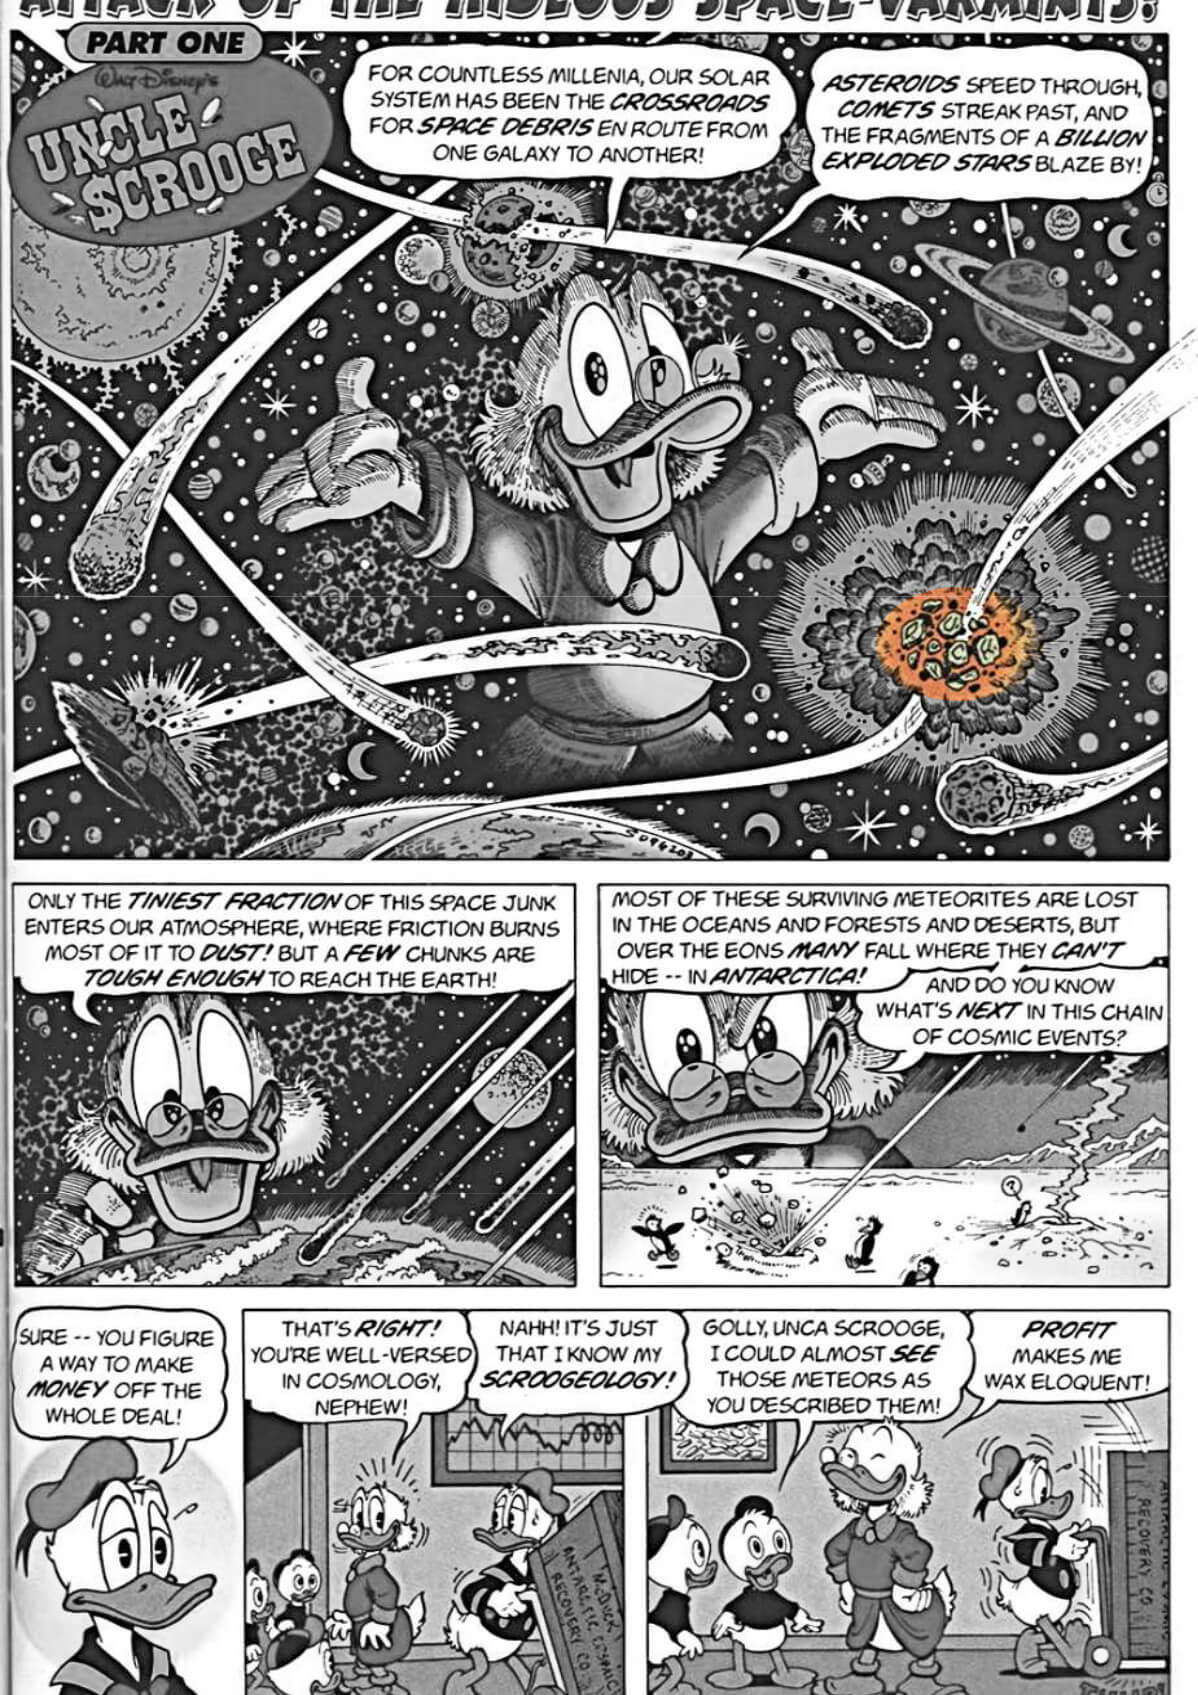 D.U.C.K in Attack Of The Hideous Space-Varmints! first page